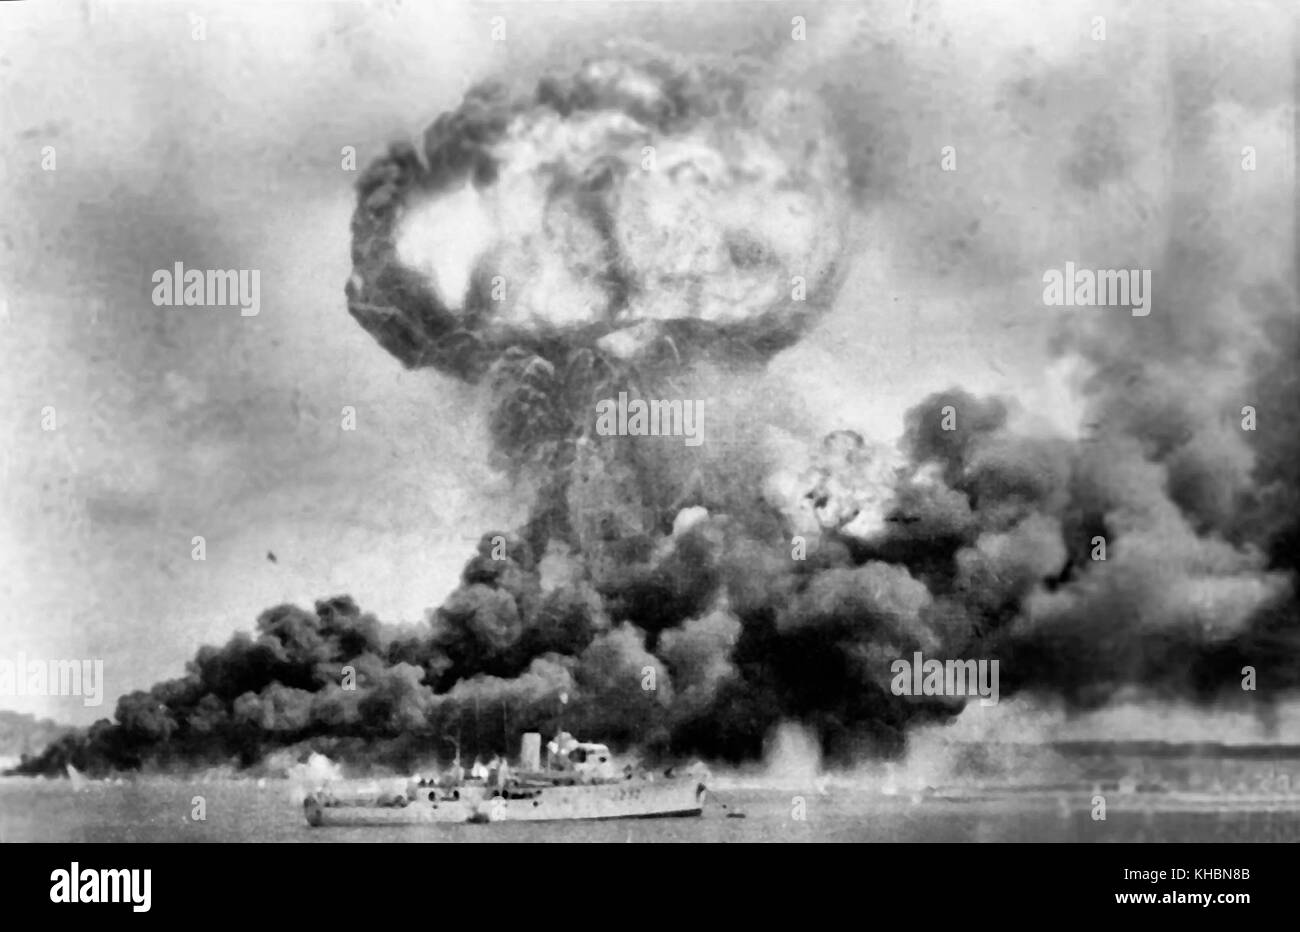 The explosion of the MV Neptuna and clouds of smoke from oil storage tanks, hit during the first Japanese air raid on Australia's mainland, at Darwin on February 19, 1942. In the foreground is HMAS Deloraine, which escaped damage. Date 19 February 1942 Stock Photo